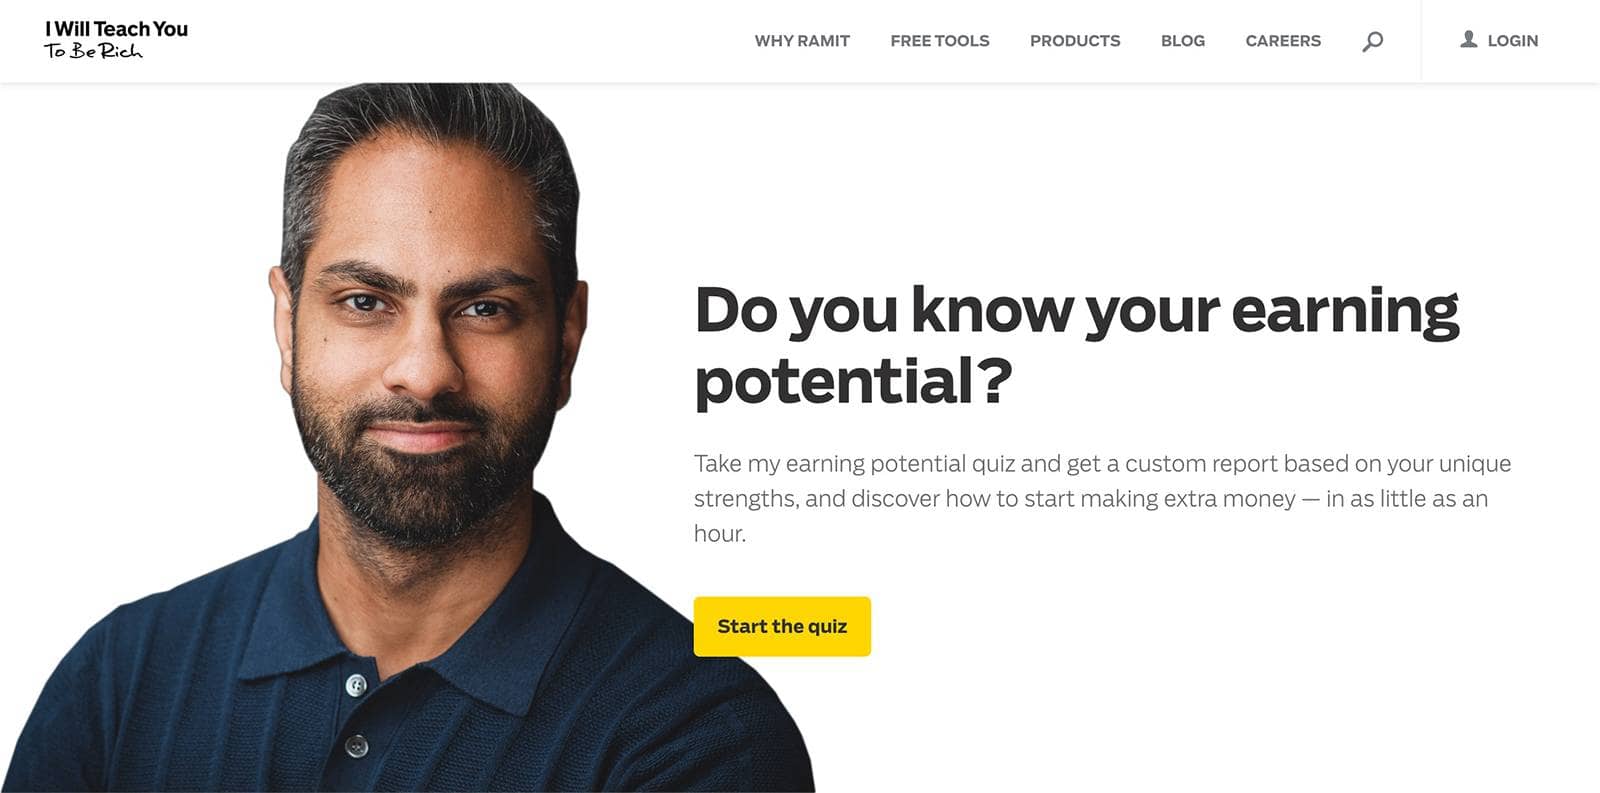 Ramit Sethi's "I Will Teach You To Be Rich" homepage quiz